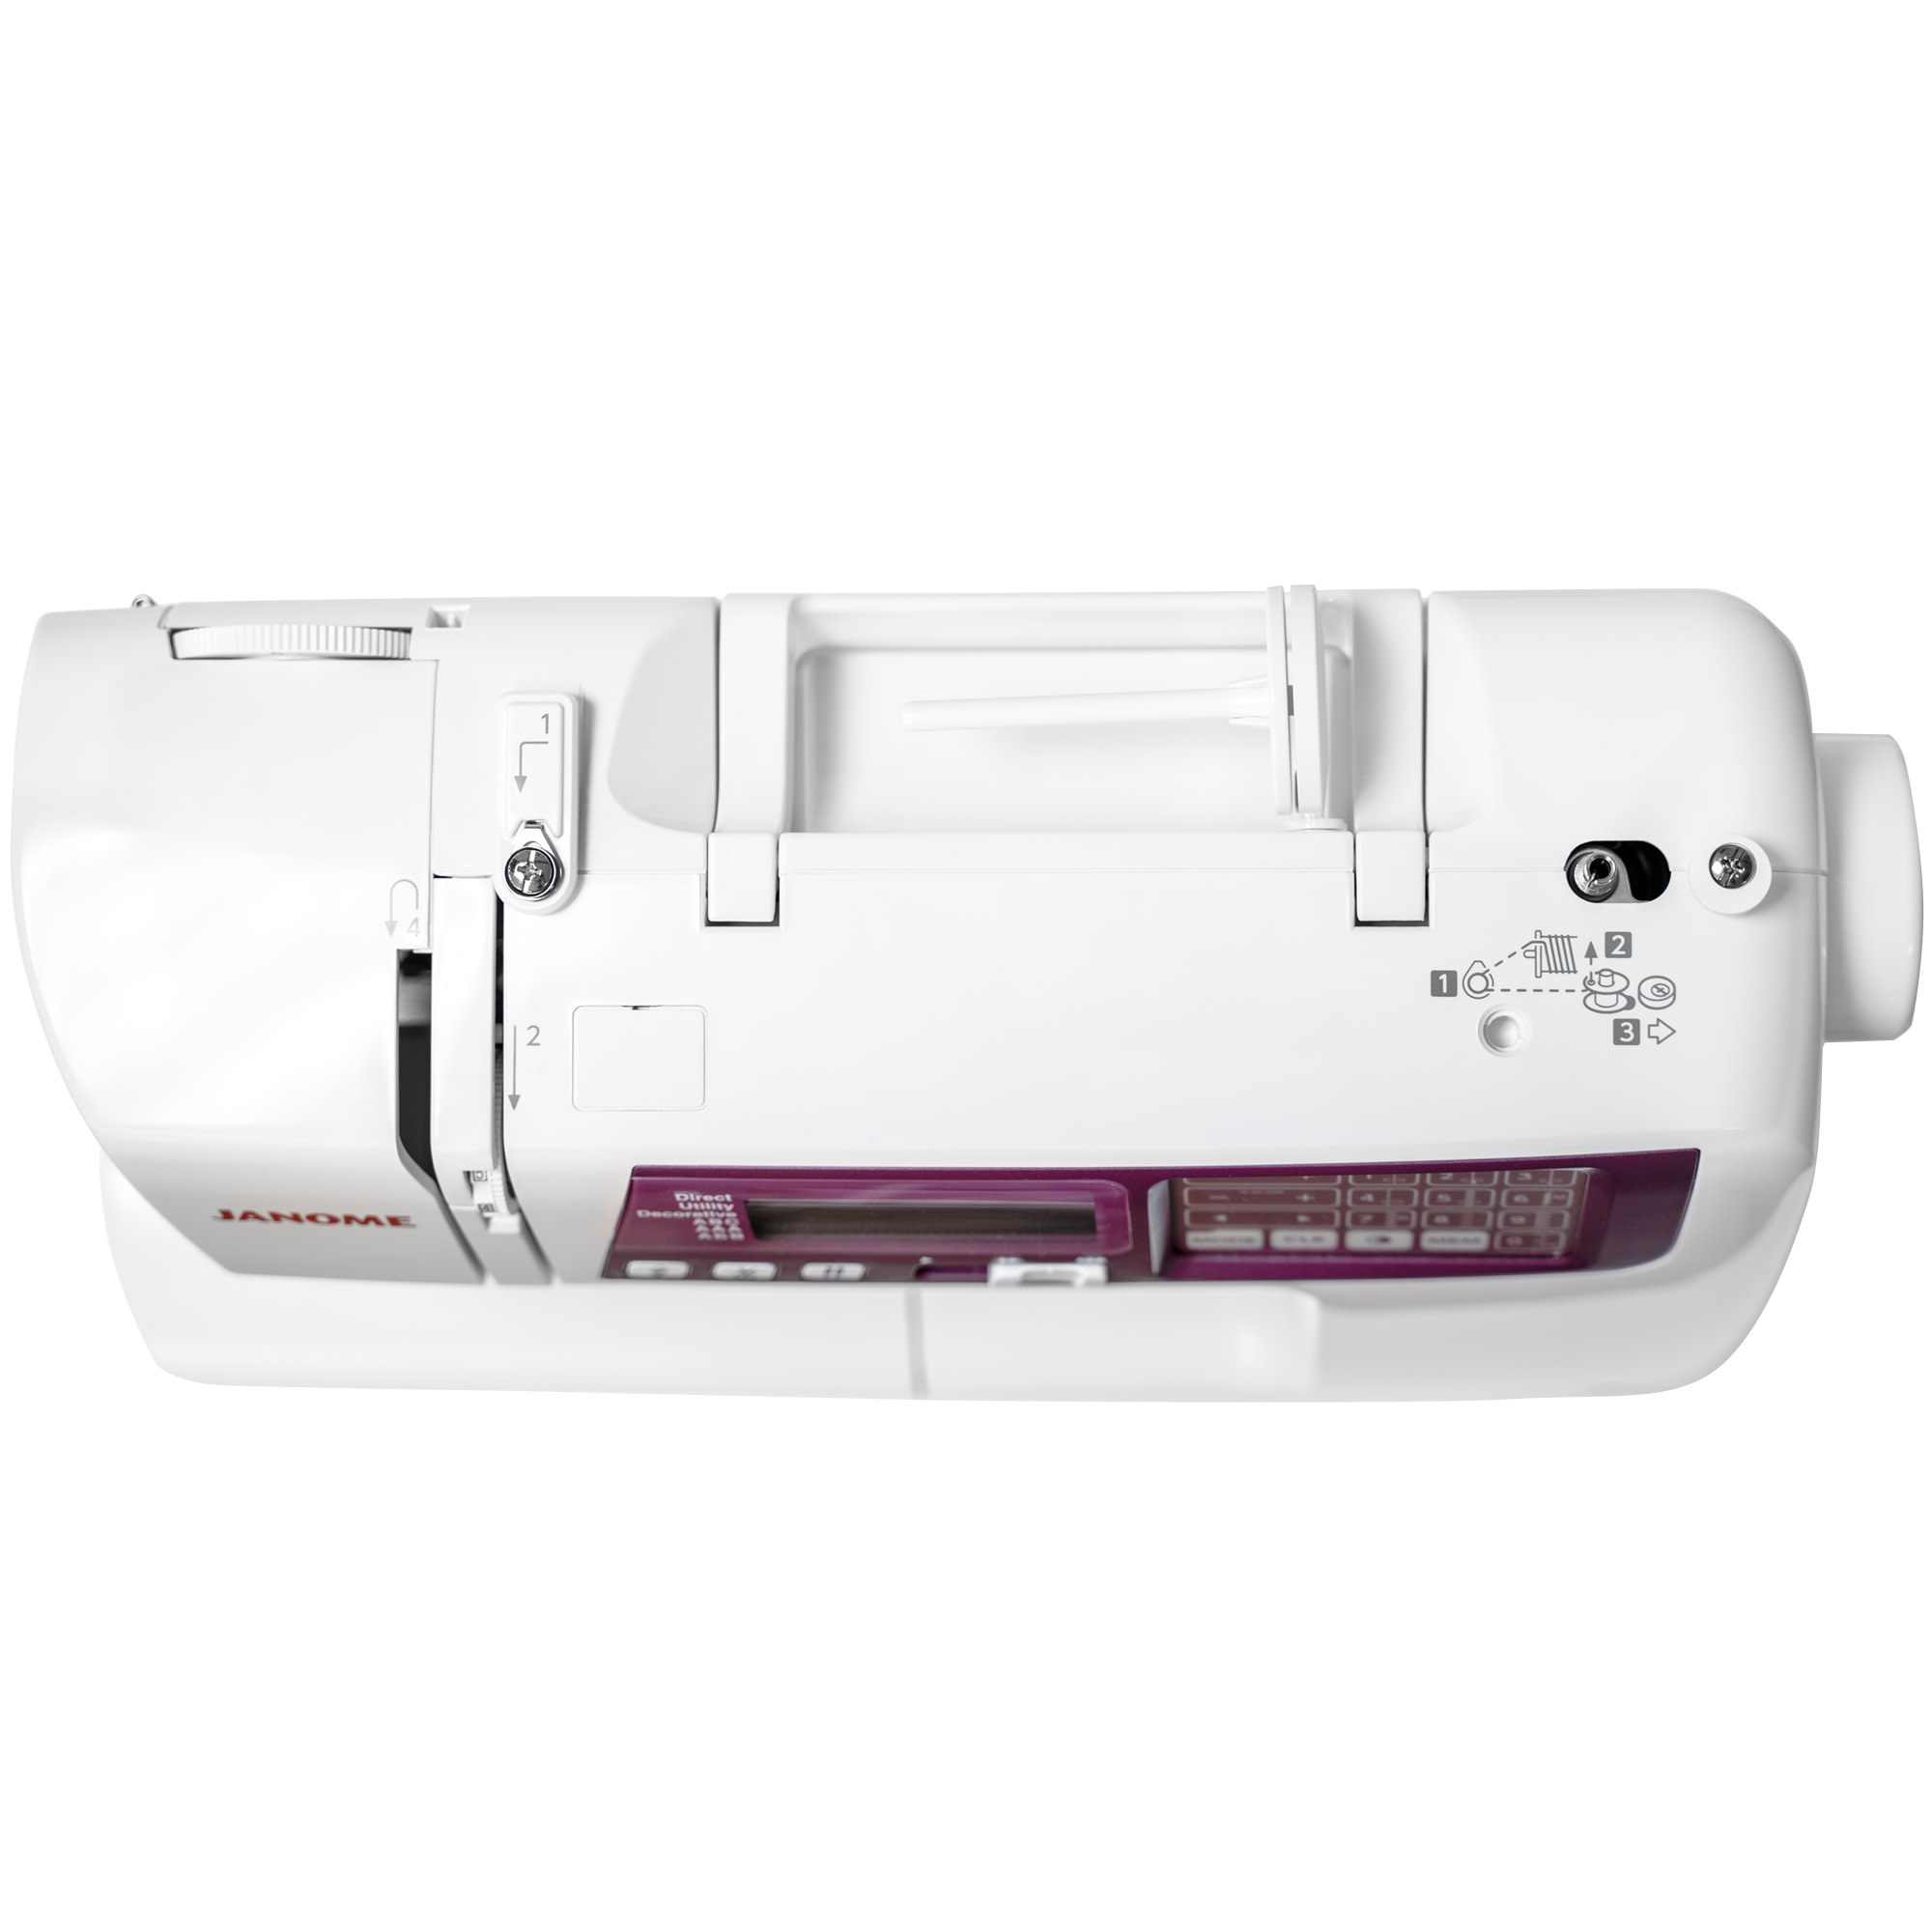 Janome sewing 4120QDC-G